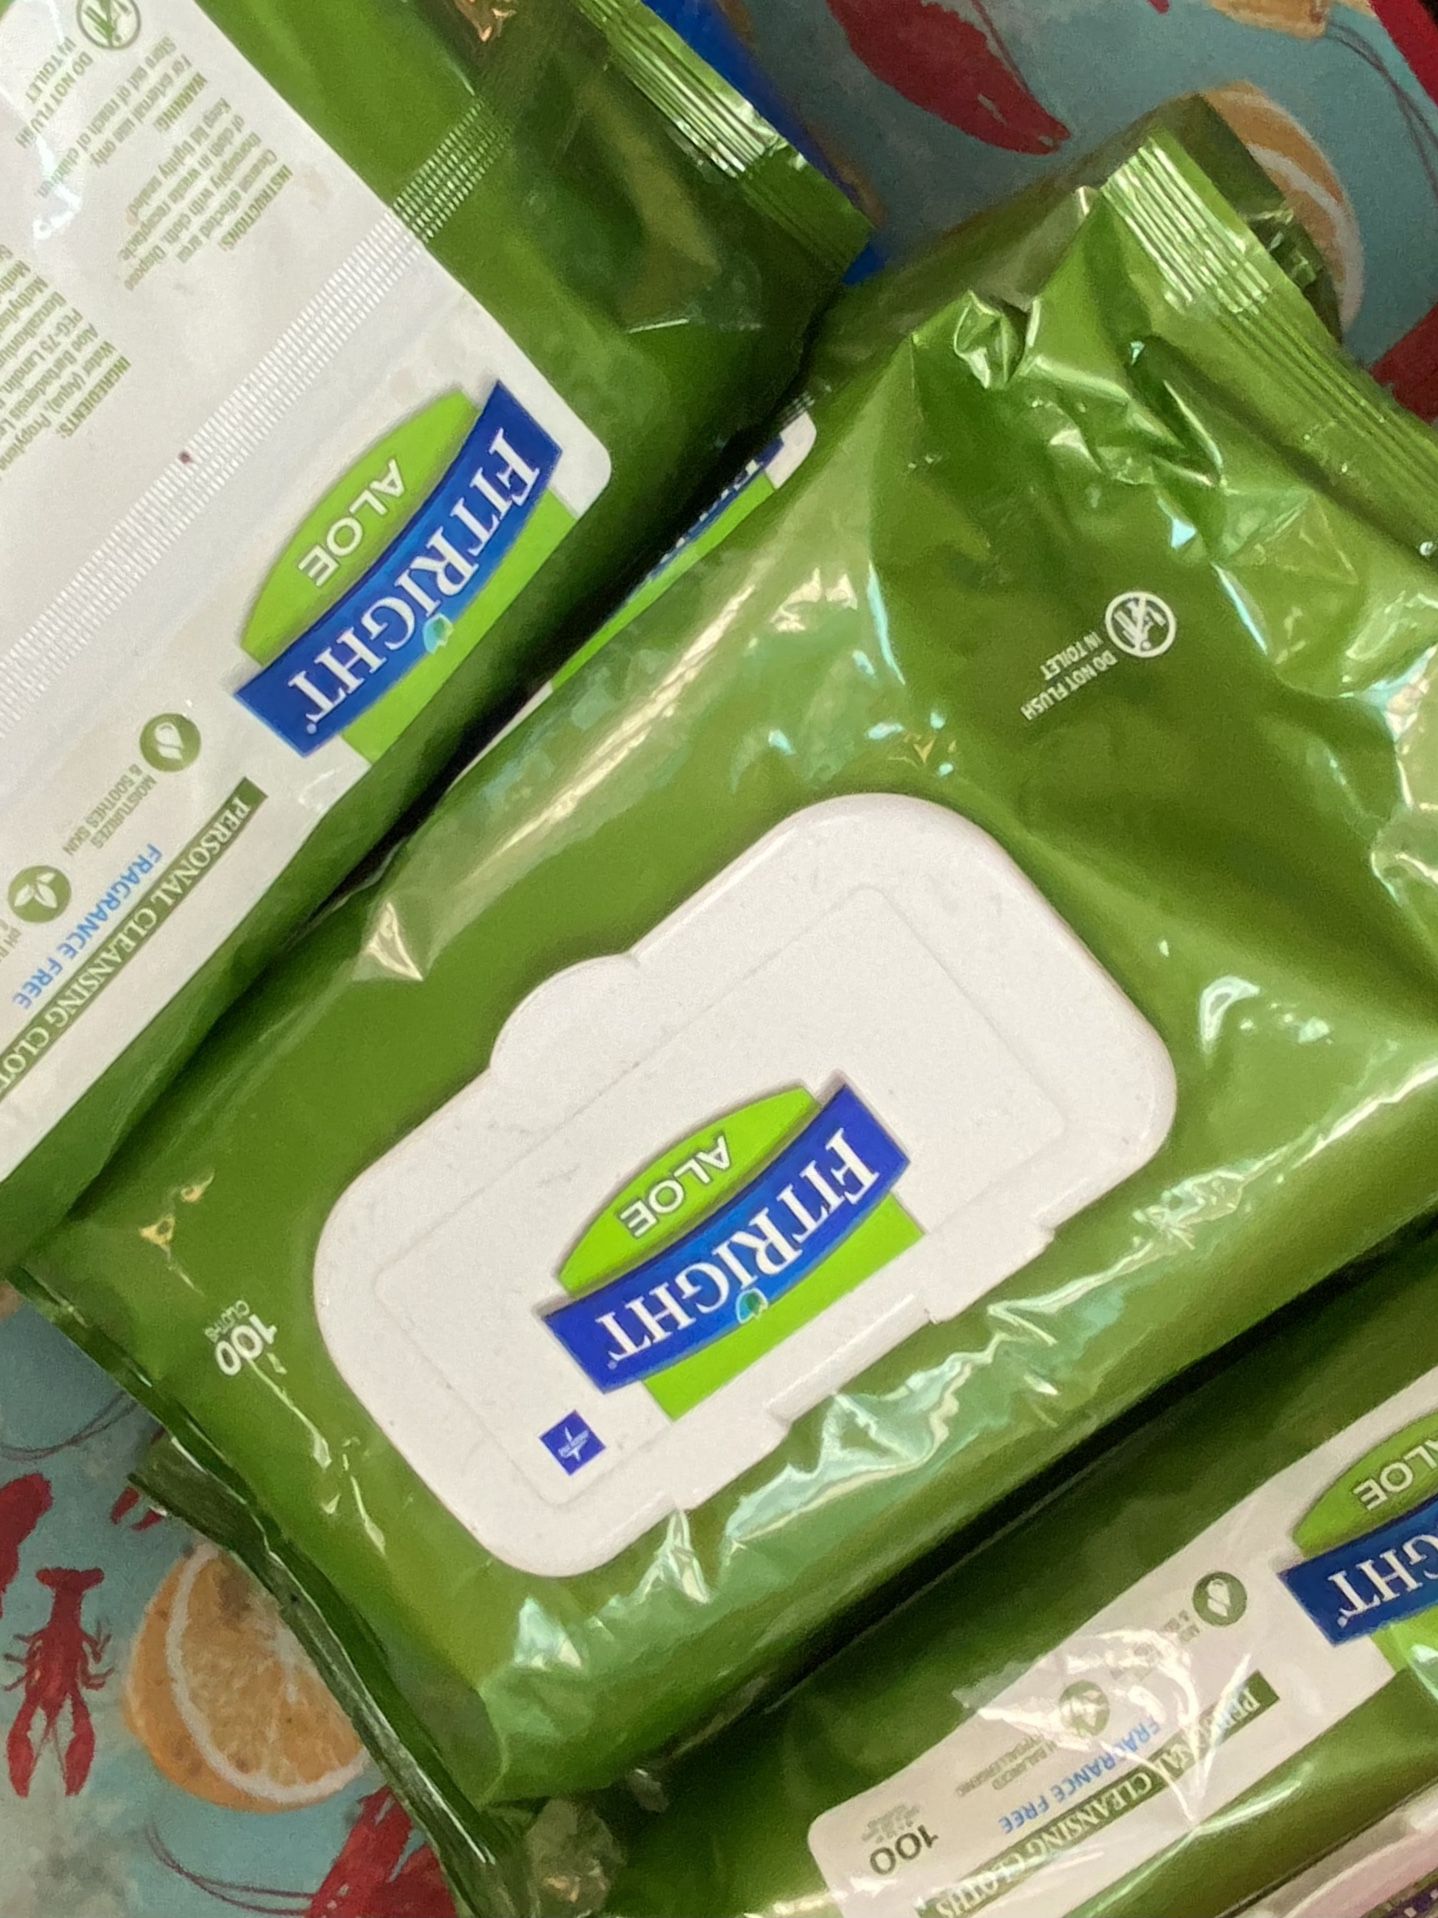 Wipes 100 Count $3 Each